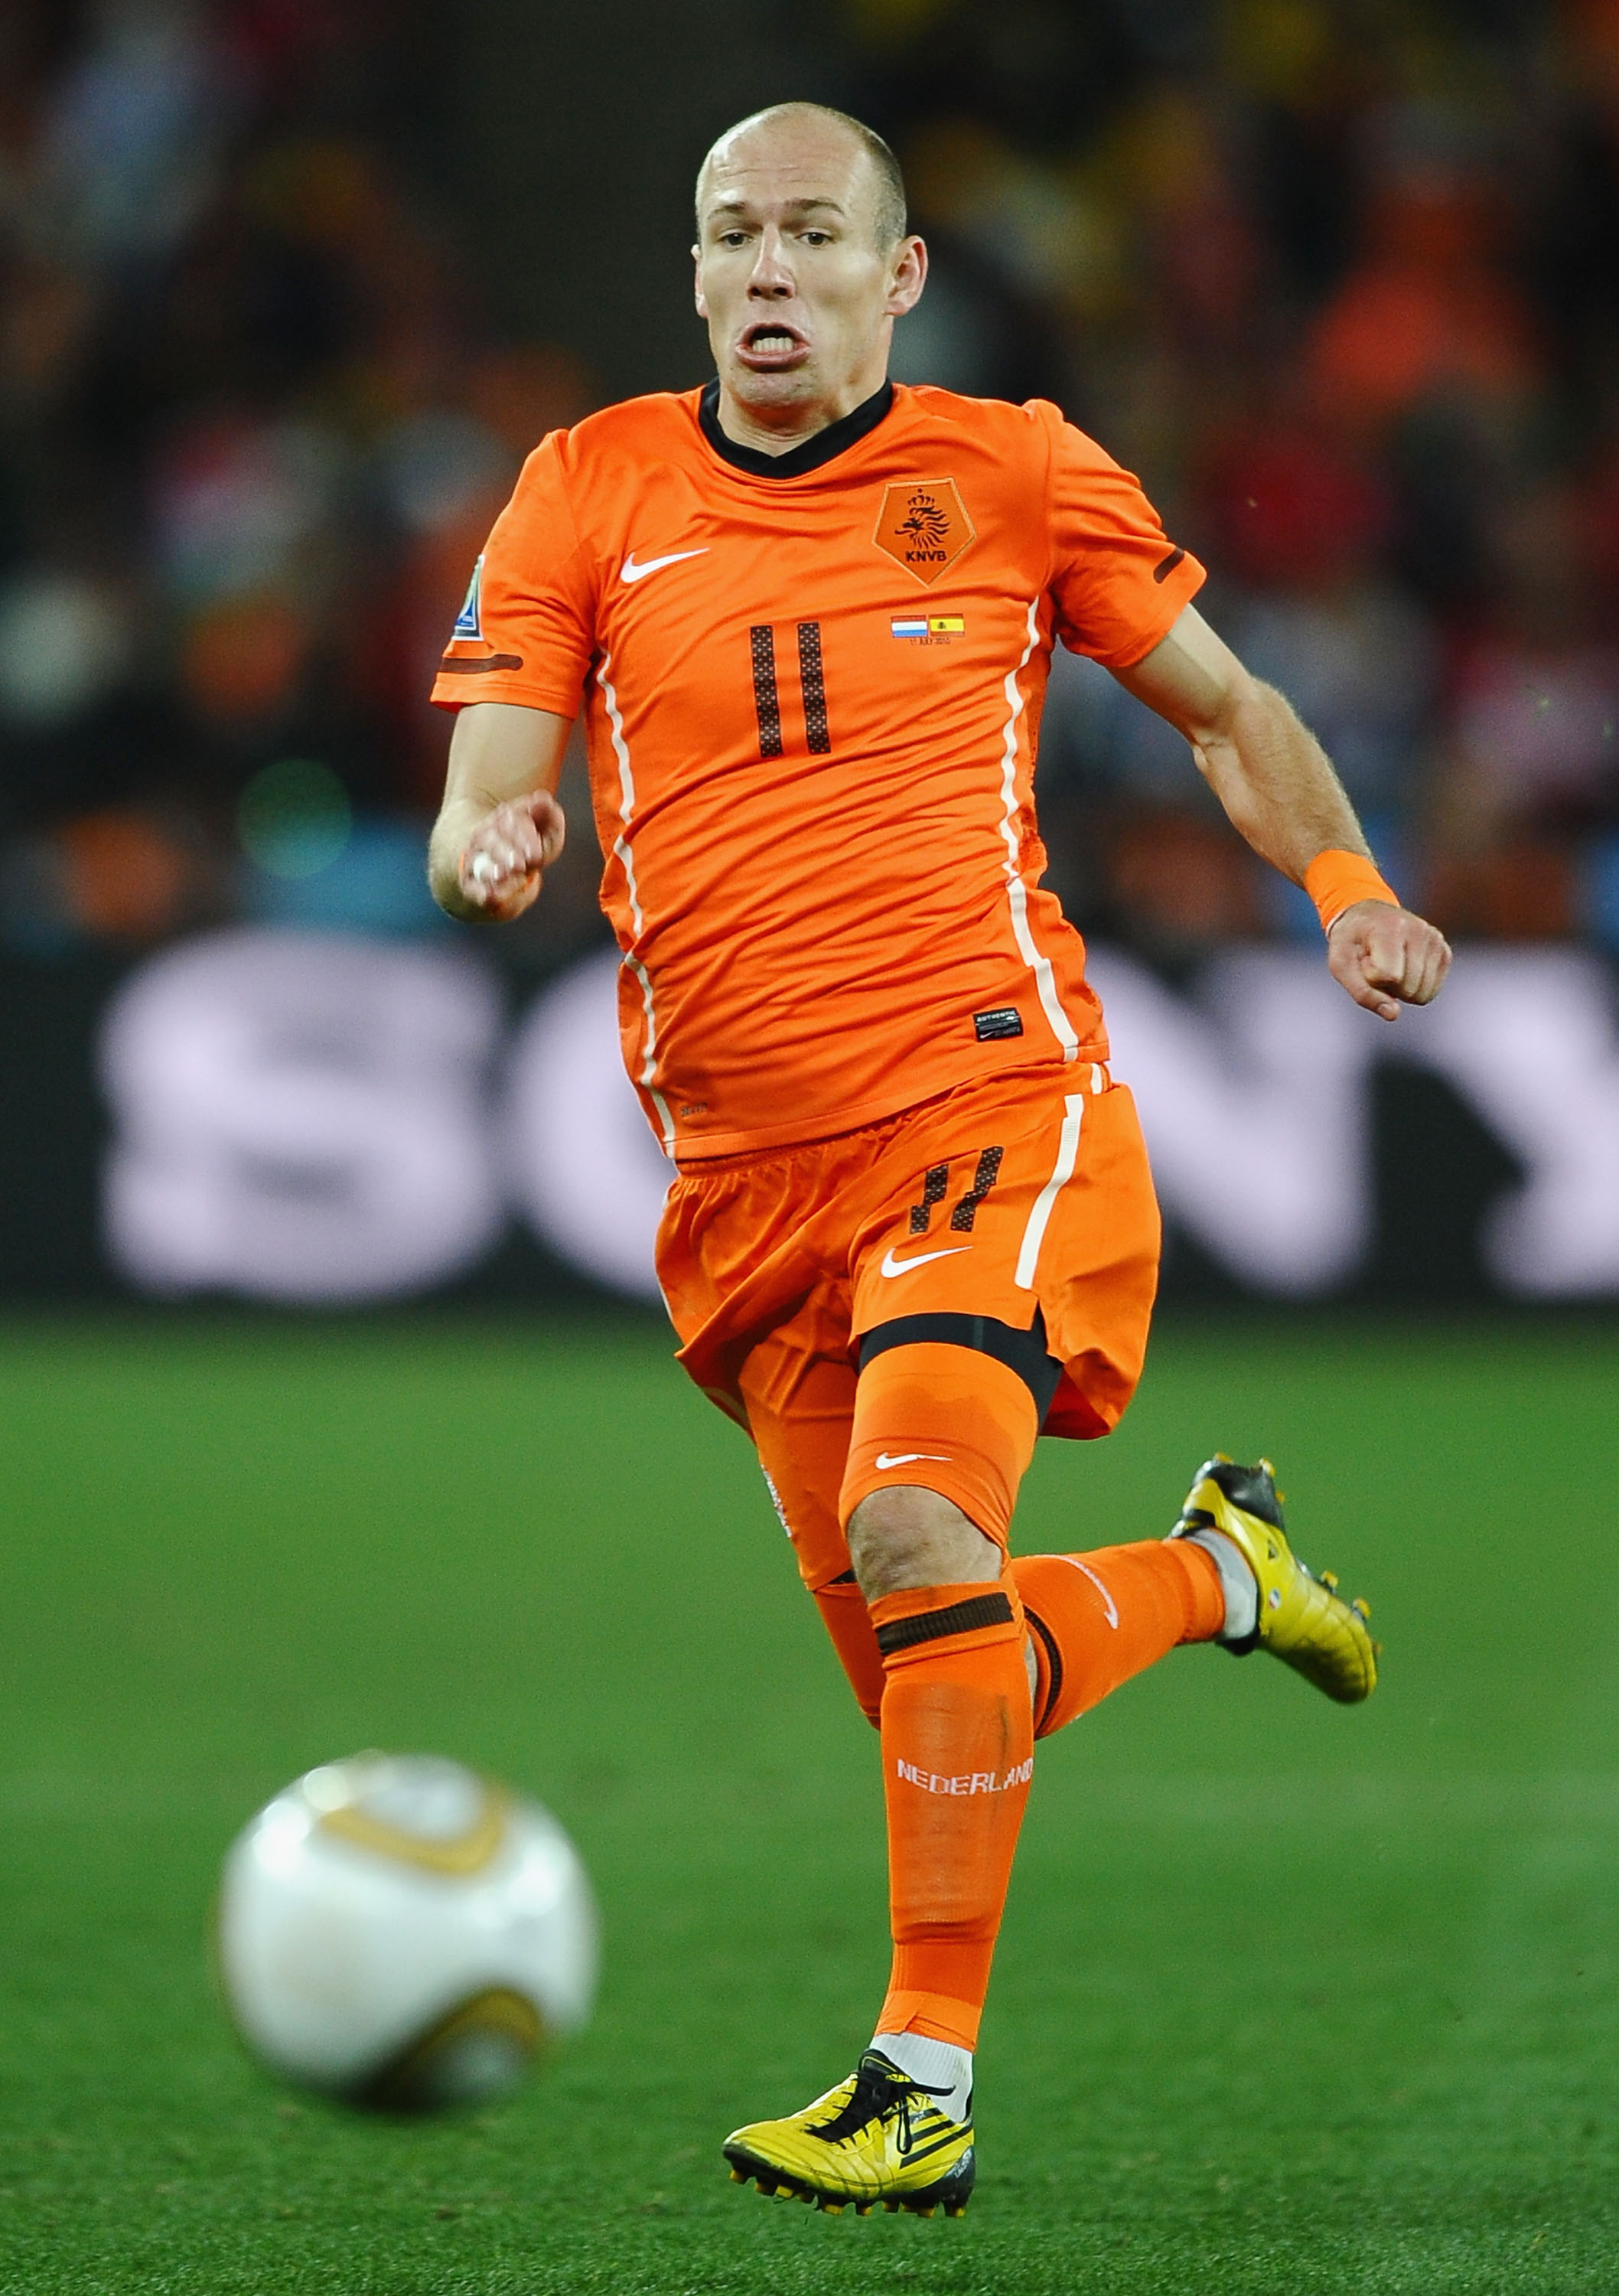 JOHANNESBURG, SOUTH AFRICA - JULY 11:  Arjen Robben of the Netherlands in action during the 2010 FIFA World Cup South Africa Final match between Netherlands and Spain at Soccer City Stadium on July 11, 2010 in Johannesburg, South Africa.  (Photo by Lauren